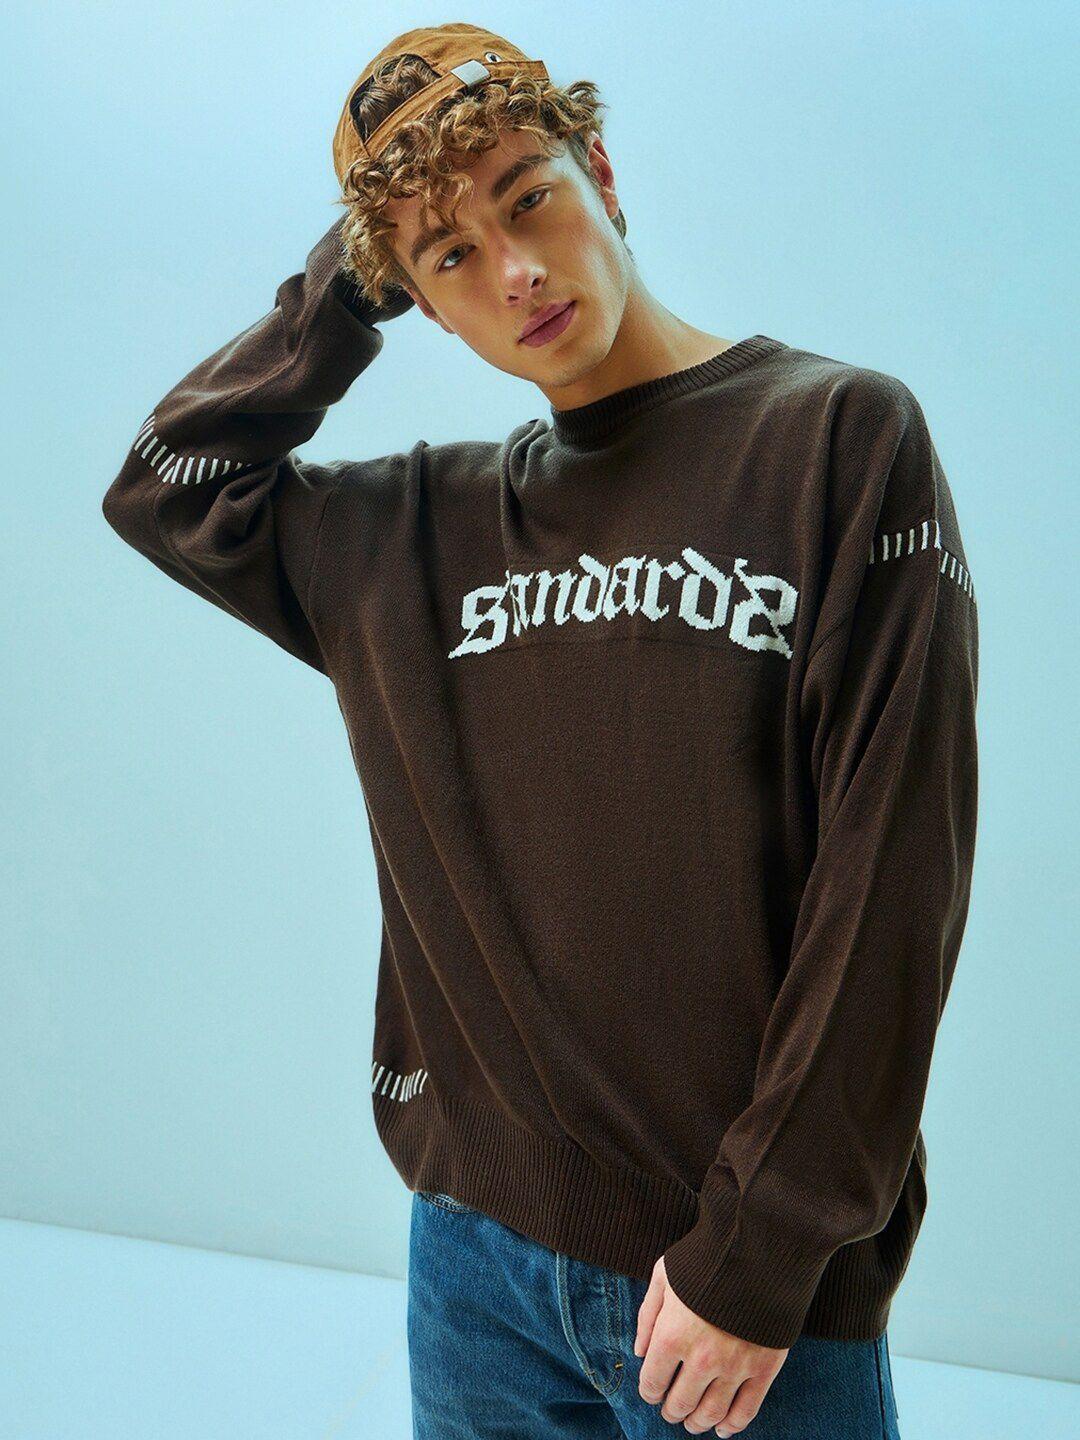 bewakoof-brown-typography-printed-acrylic-super-loose-fit-flat-knit-pullover-sweater